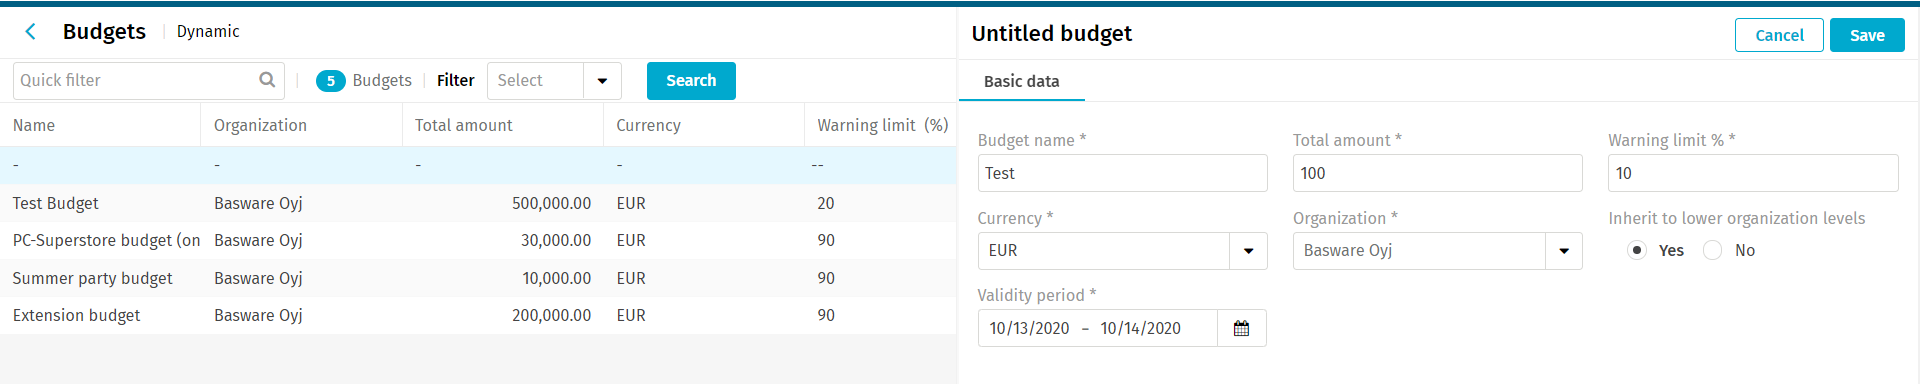 Budgets list view with new budget